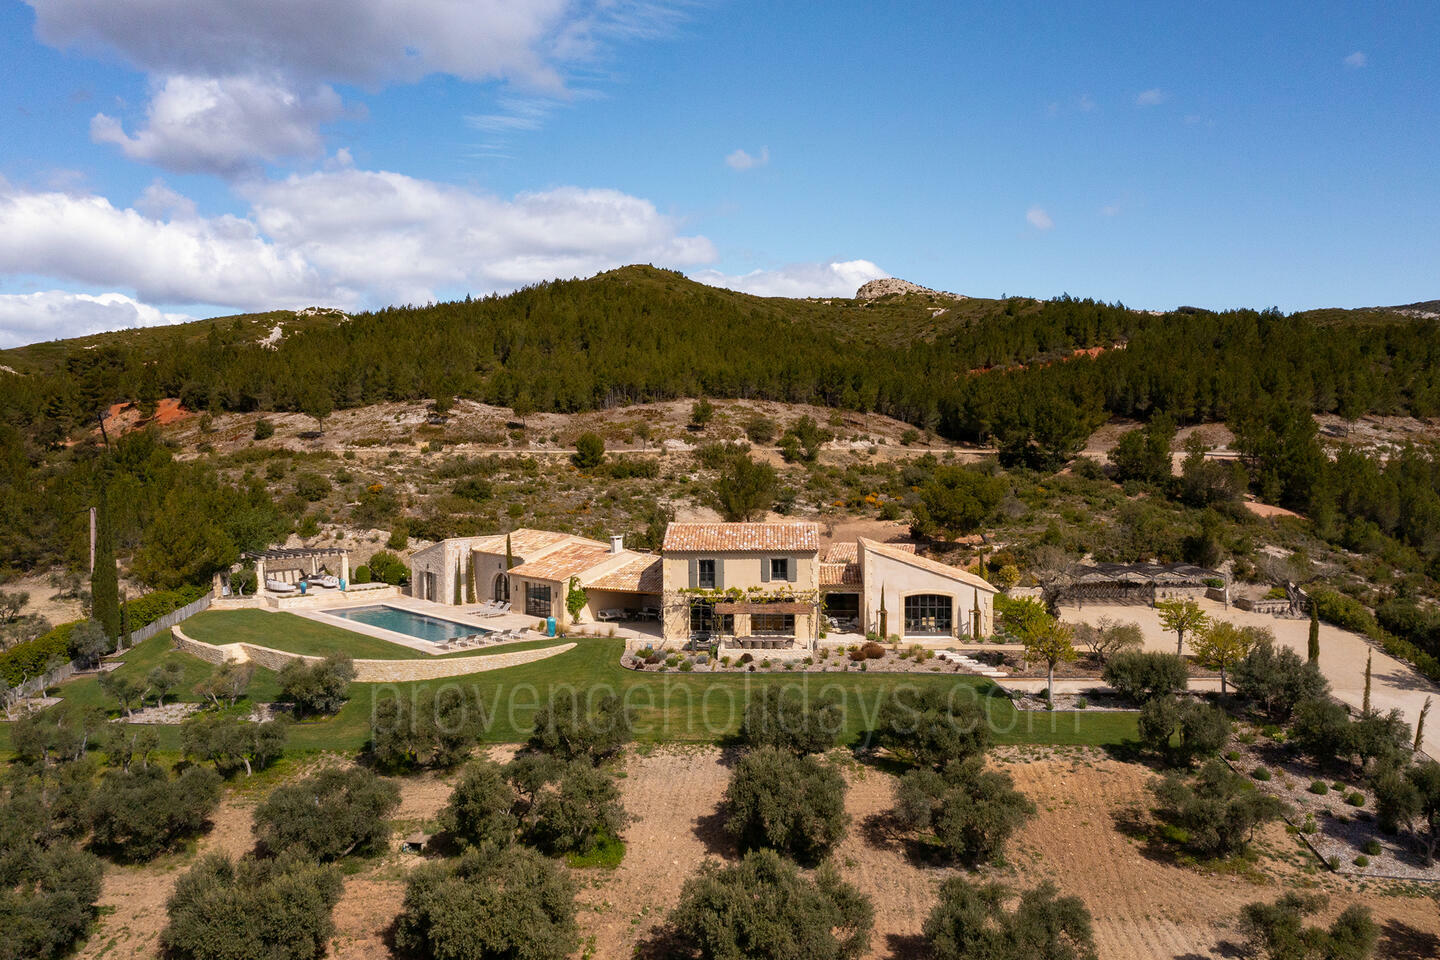 A panoramic view in the heart of the Alpilles 1 - Mas des Collines: Villa: Exterior